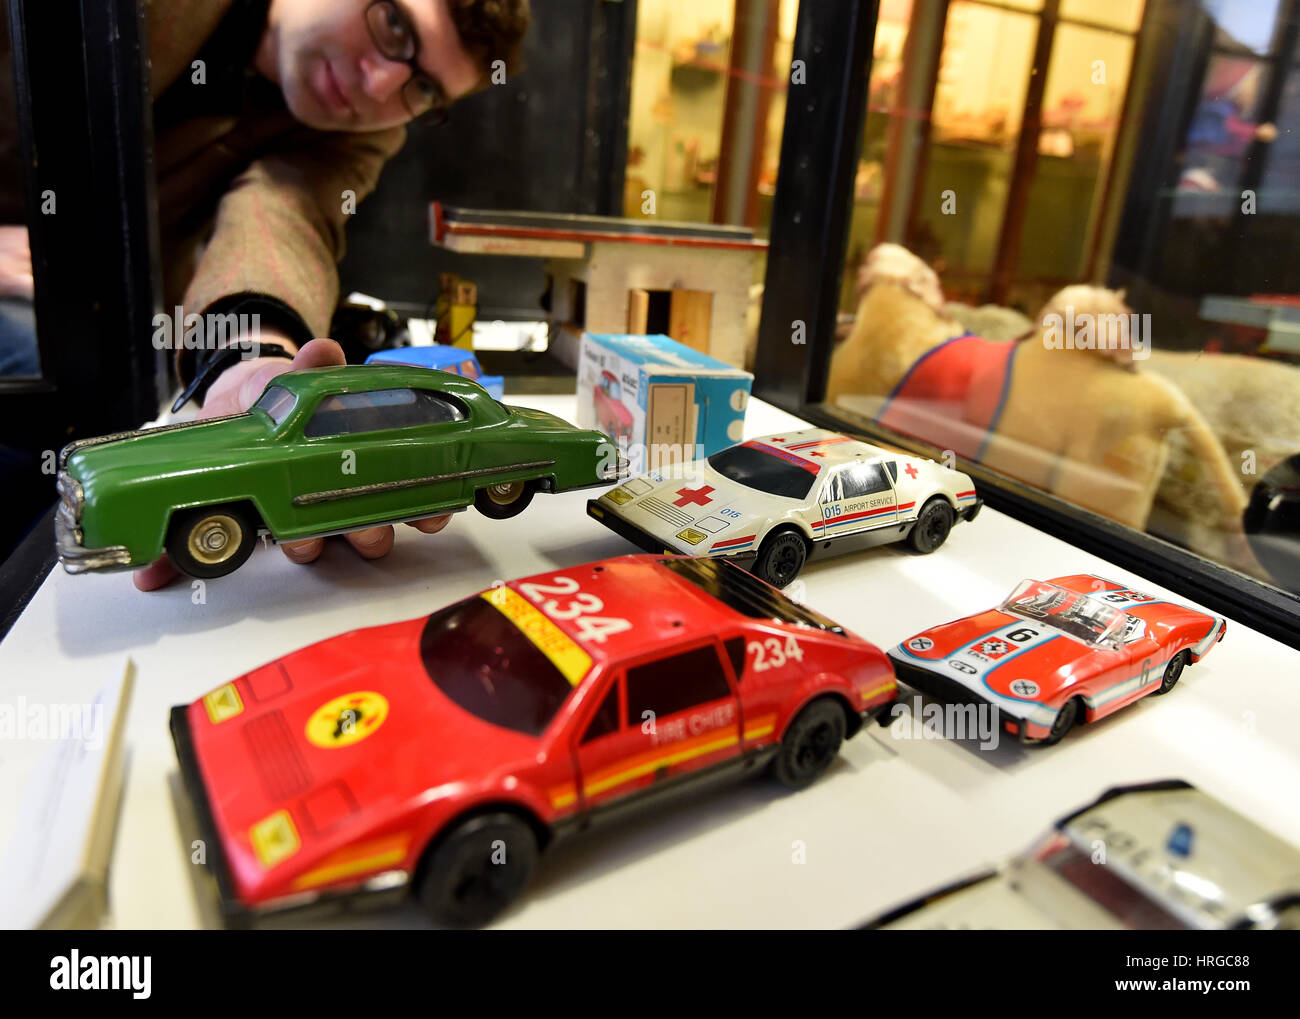 Kleessen, Germany. 01st Mar, 2017. Museum director Frithjof Hahn shows a metal car from the VEB Mechanical toys Brandenburg (MSB) which made tin cars until 1989 at the toy museum in Kleessen, Germany, 01 March 2017. After the winter break, the museum will open with the special exhibition 'Spielzeugauto' (lt.'Toy Cars'). Cars from the 1920s to the last GDR models and brass cars from Brandenburg will complete the exhibition of railways, construction kits and dolls' houses. Photo: Bernd Settnik/dpa-Zentralbild/dpa/Alamy Live News Stock Photo